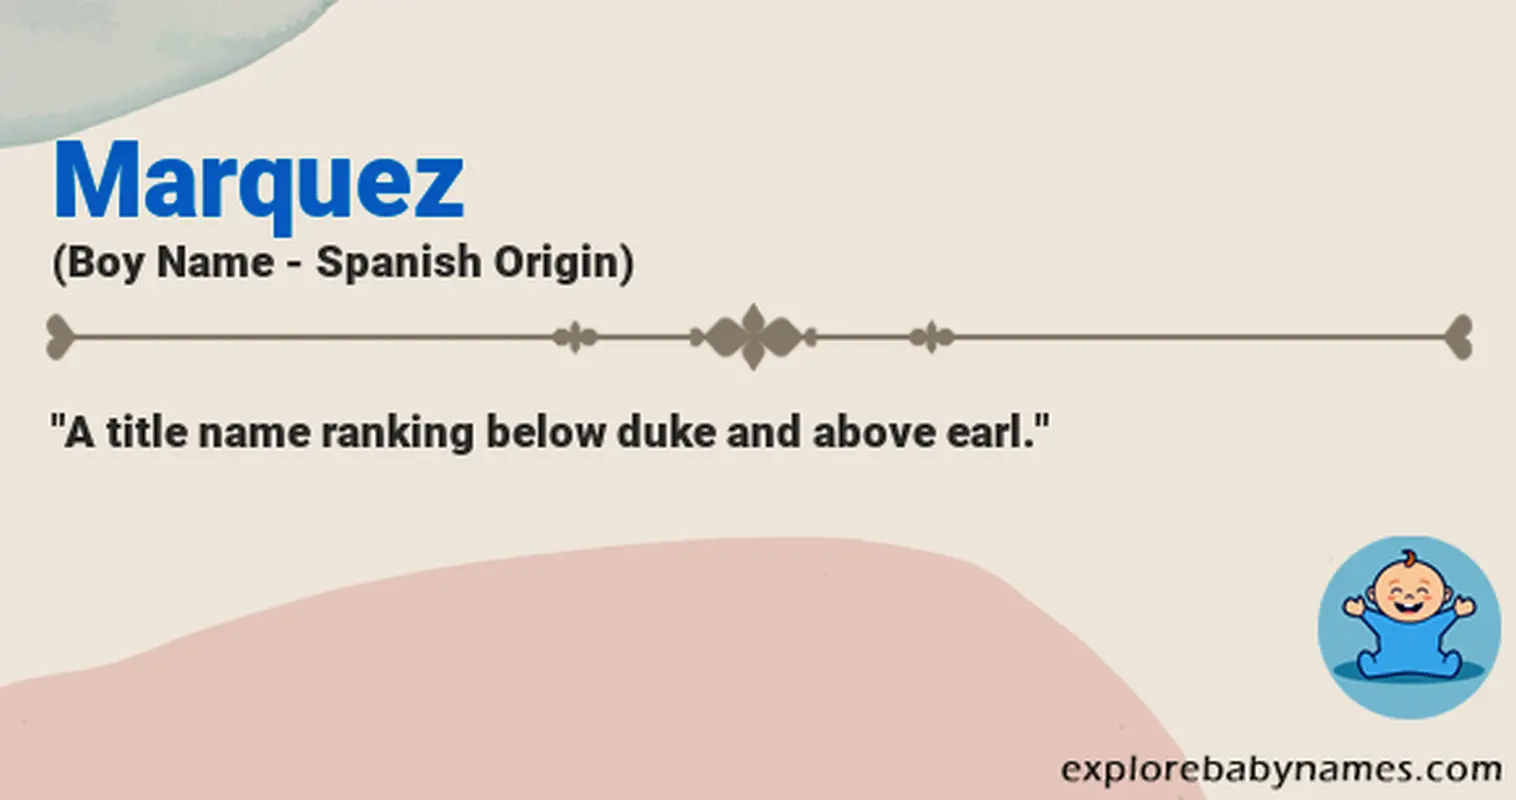 Meaning of Marquez